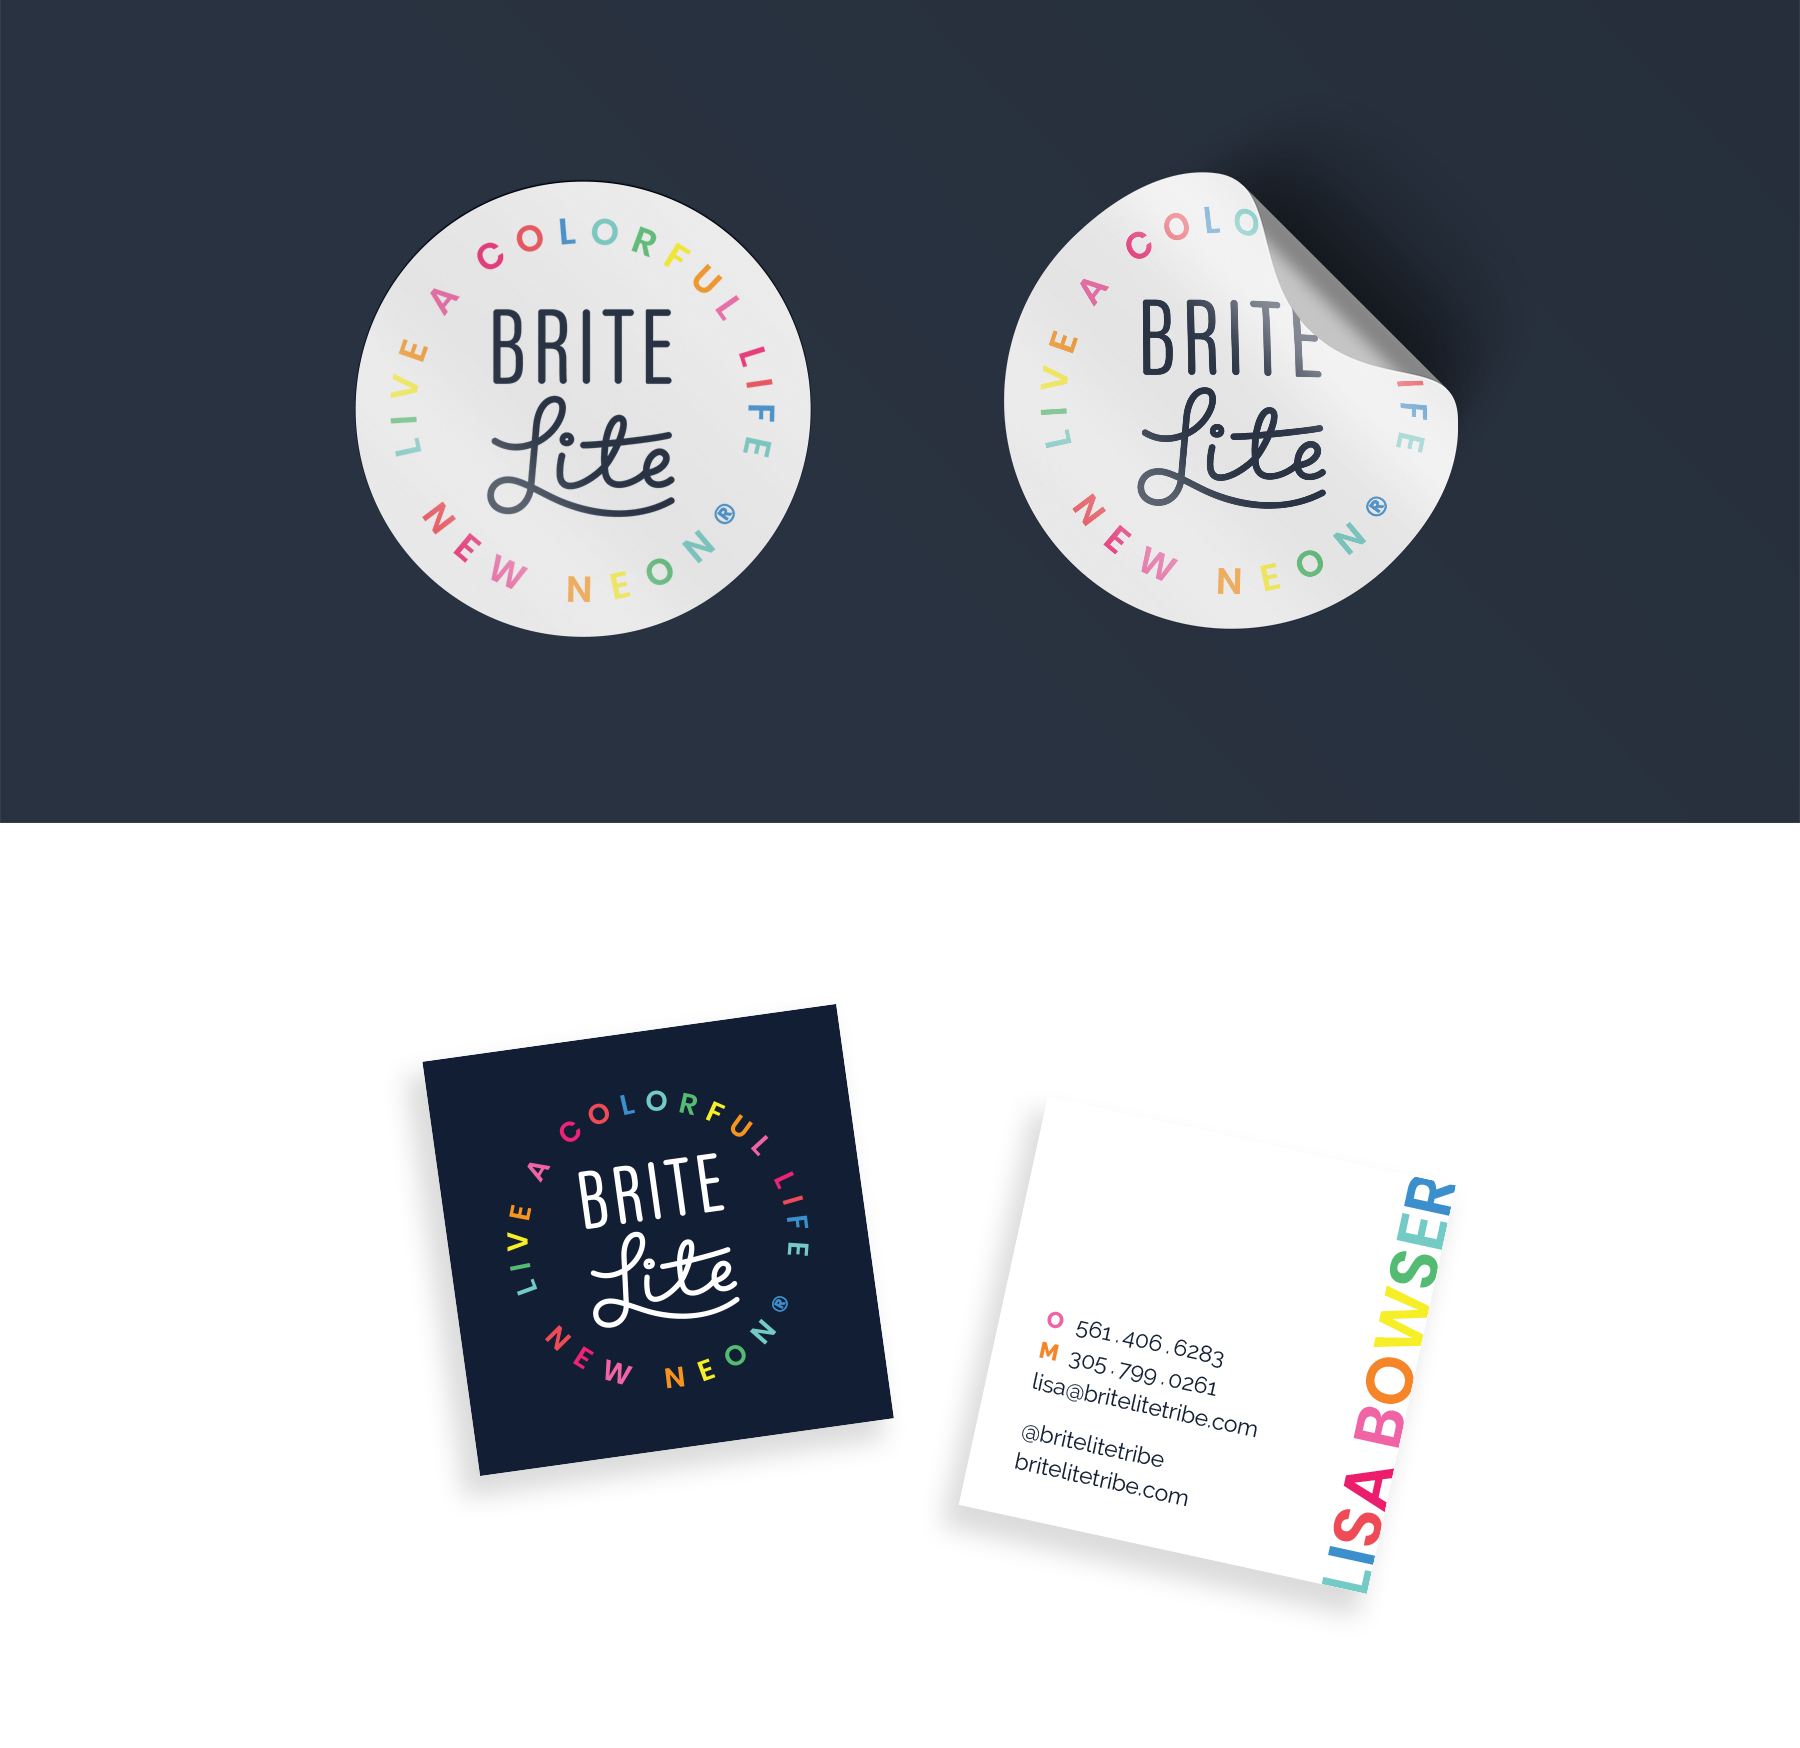 Brite Lite business cards with circular logo in white and rainbow type on a dark navy background, the back is white with the owners name anchored vertically in rainbow, with navy business information. Colorful circular stickers are shown above it.